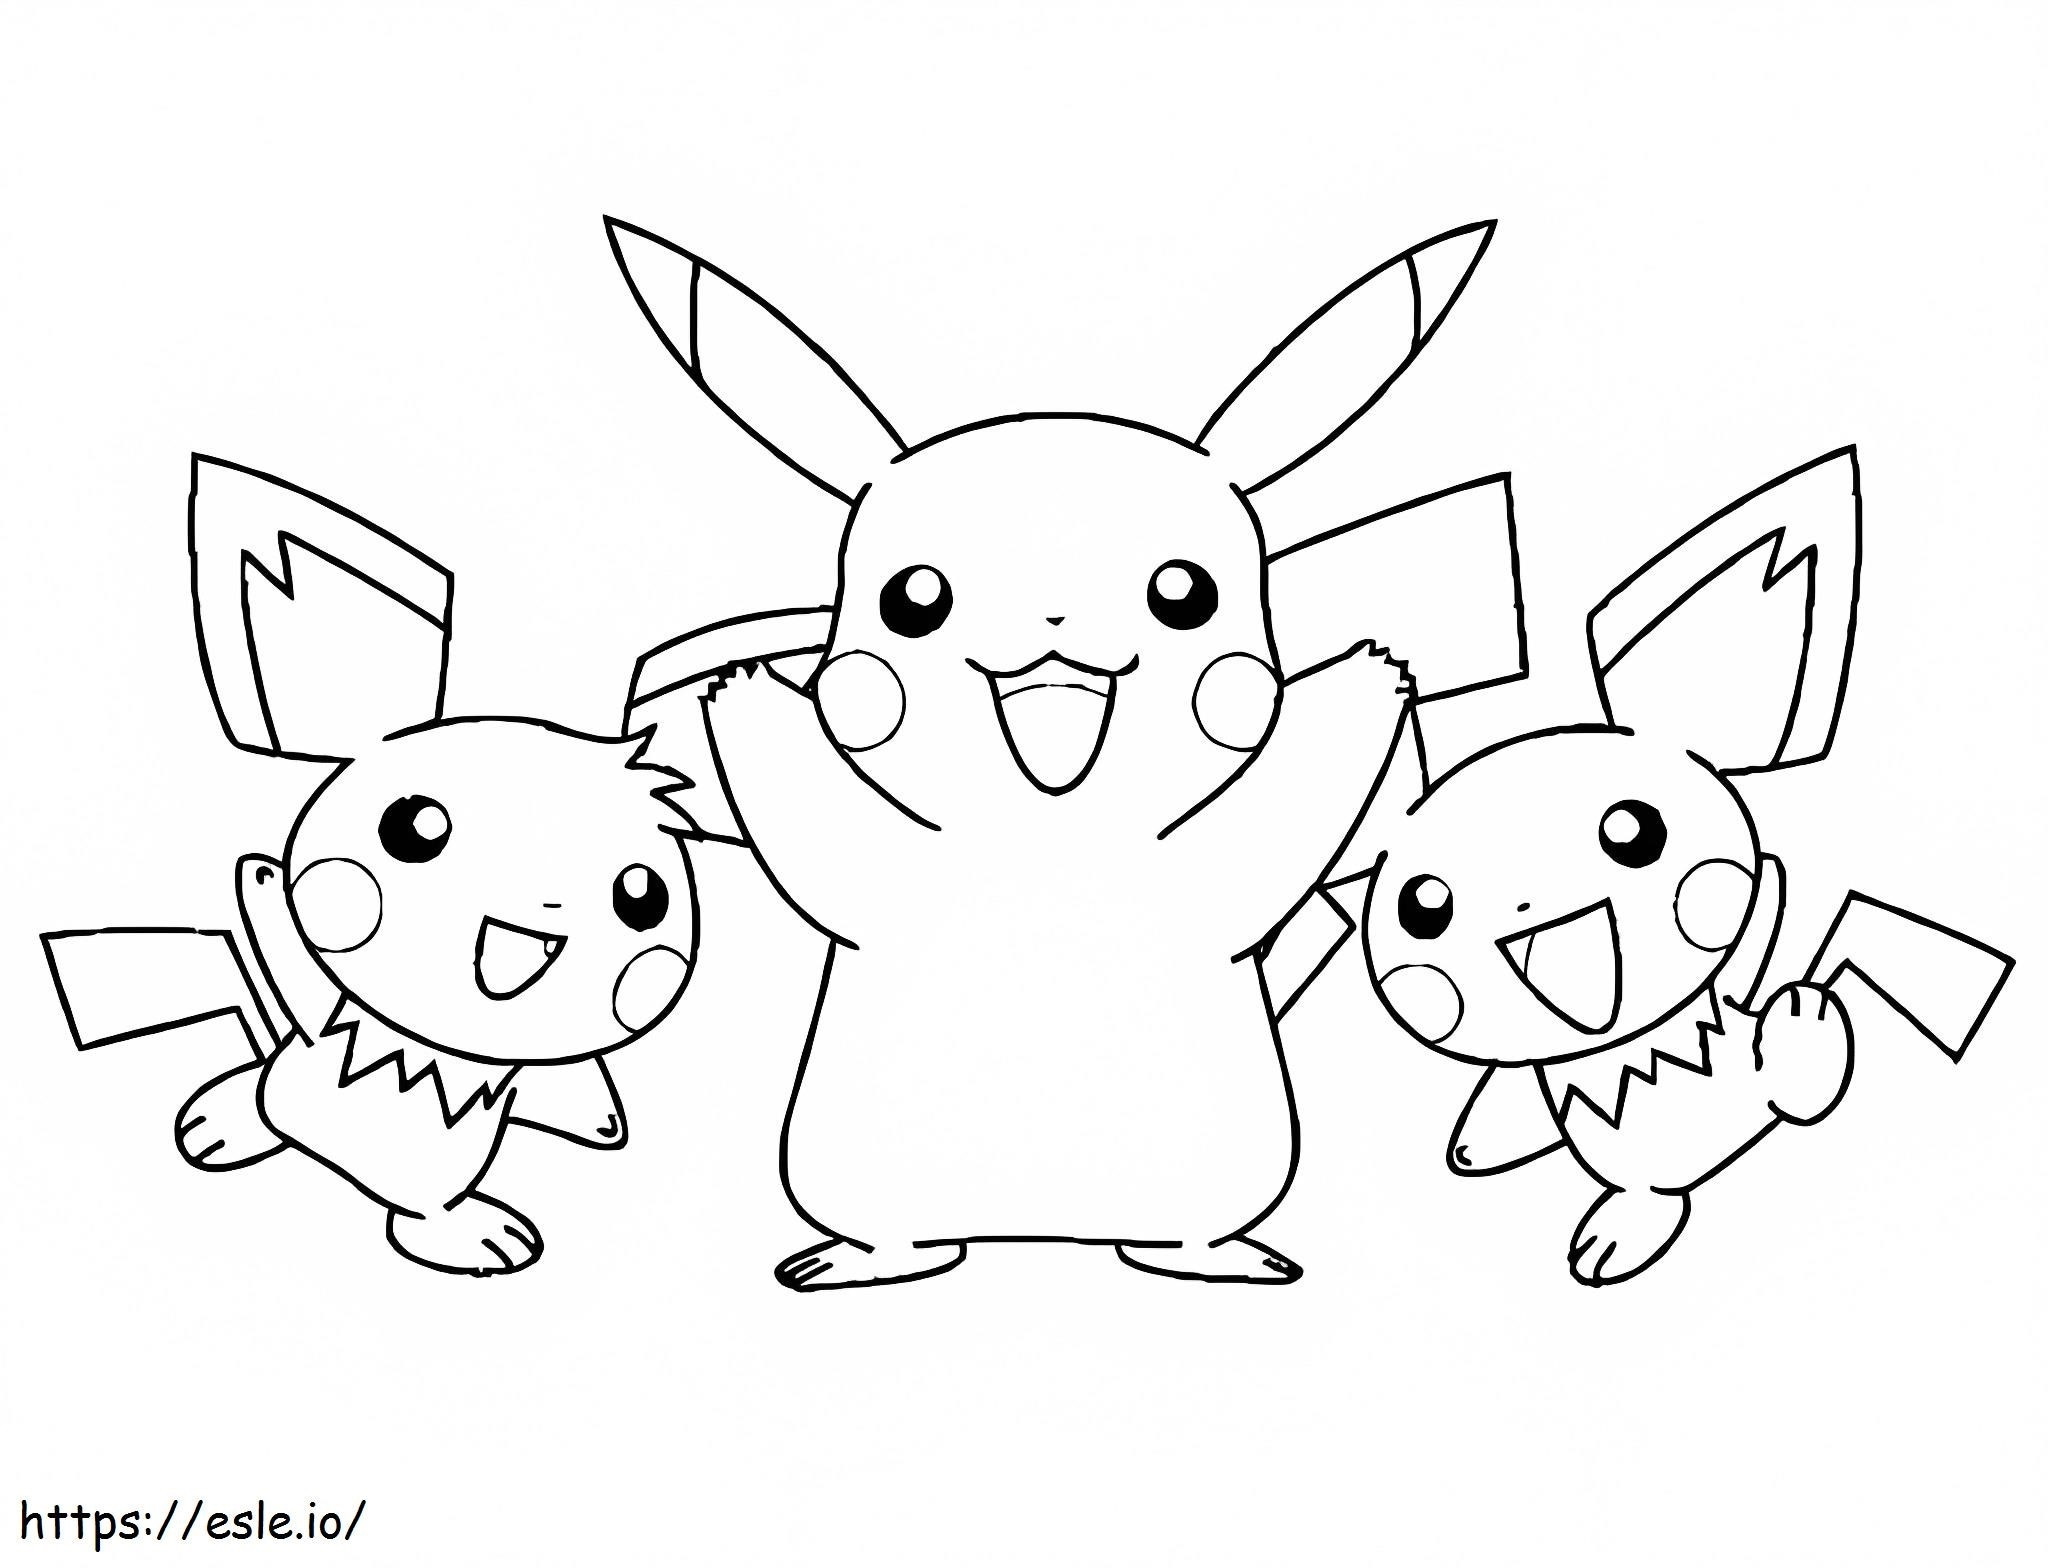 Two Pichu And Pikachu coloring page